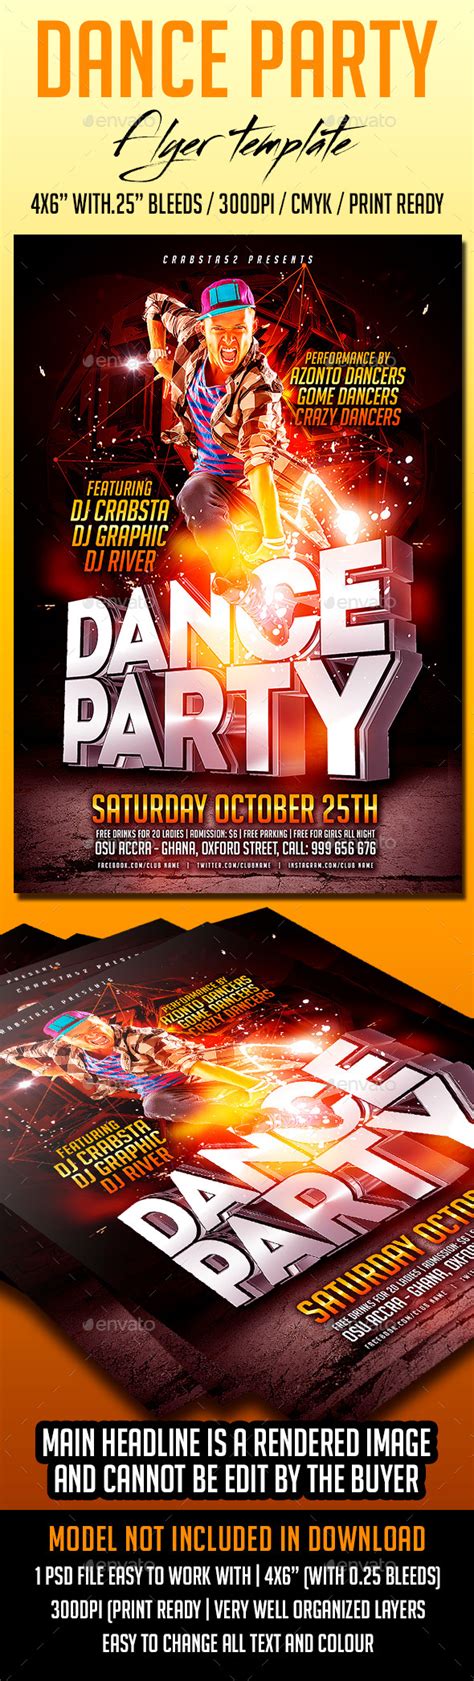 Dance Party Flyer Template By Crabsta52 Graphicriver